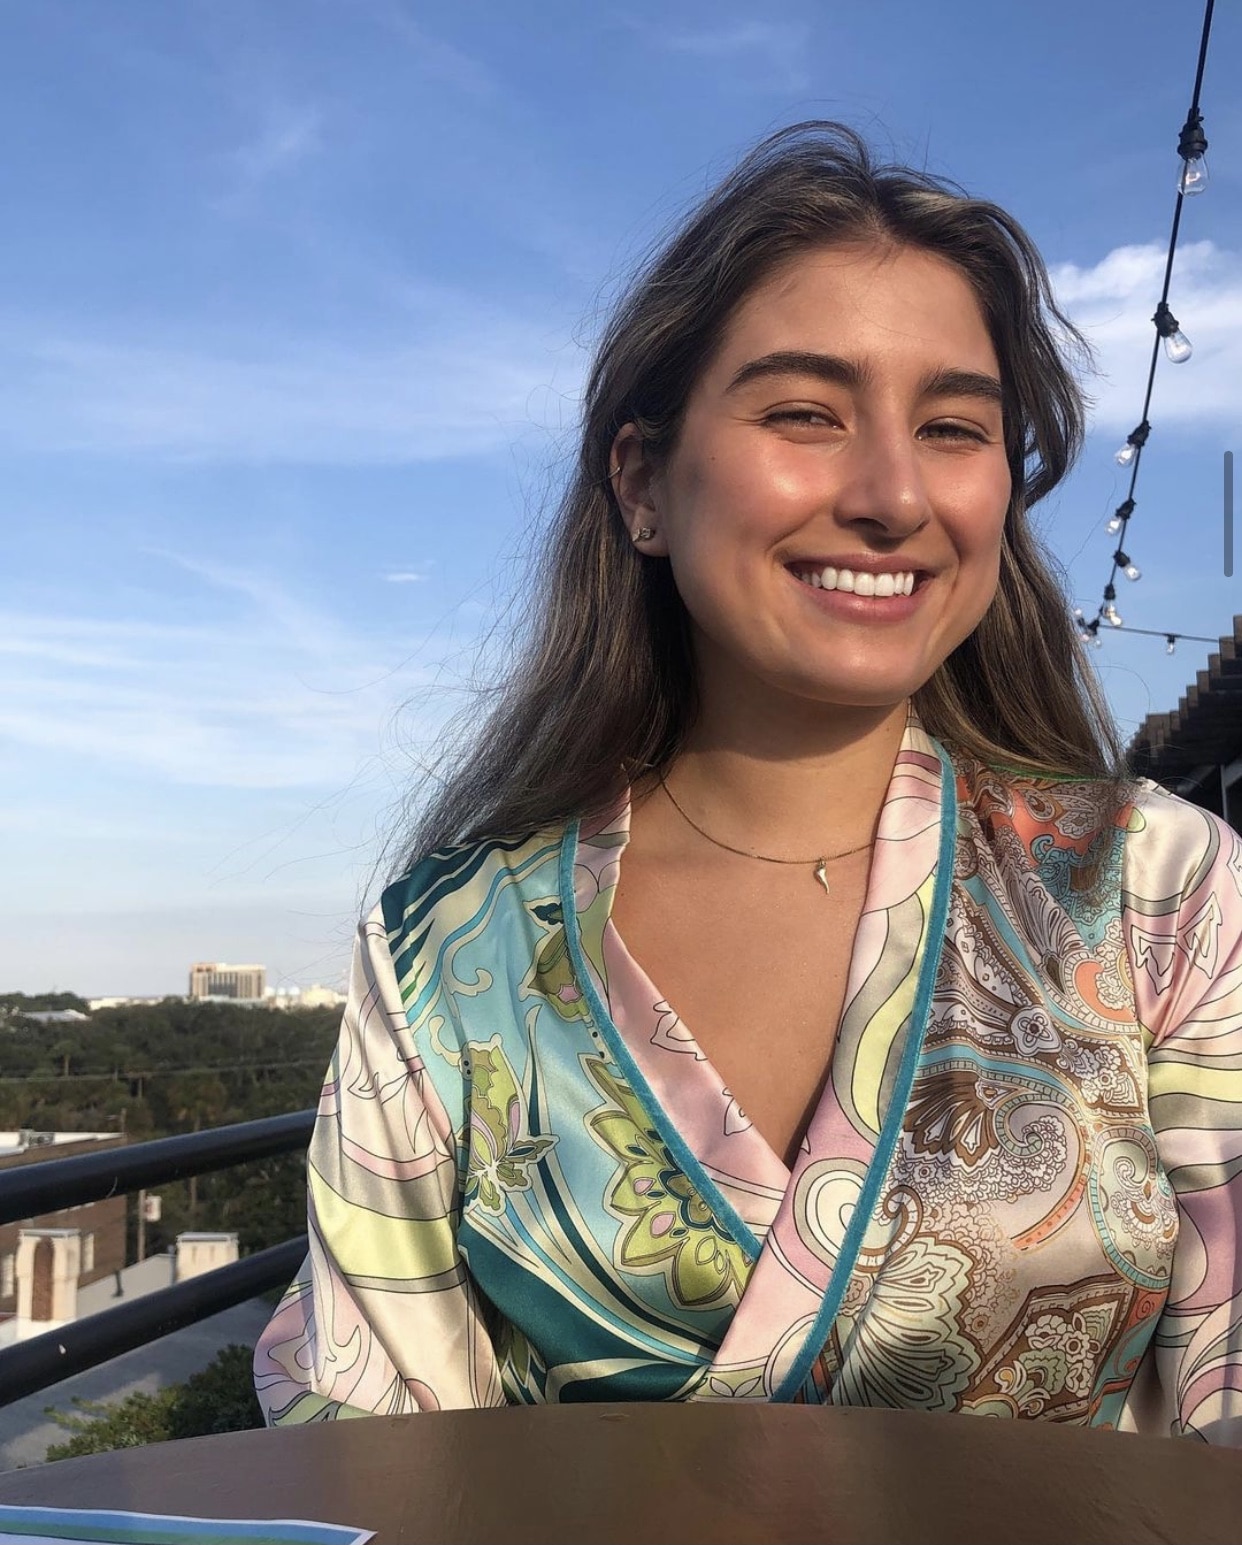 Starting just twelve days after diagnosis, Tik Tokker Liv Violette shares her story about her first six months with type 1 diabetes.